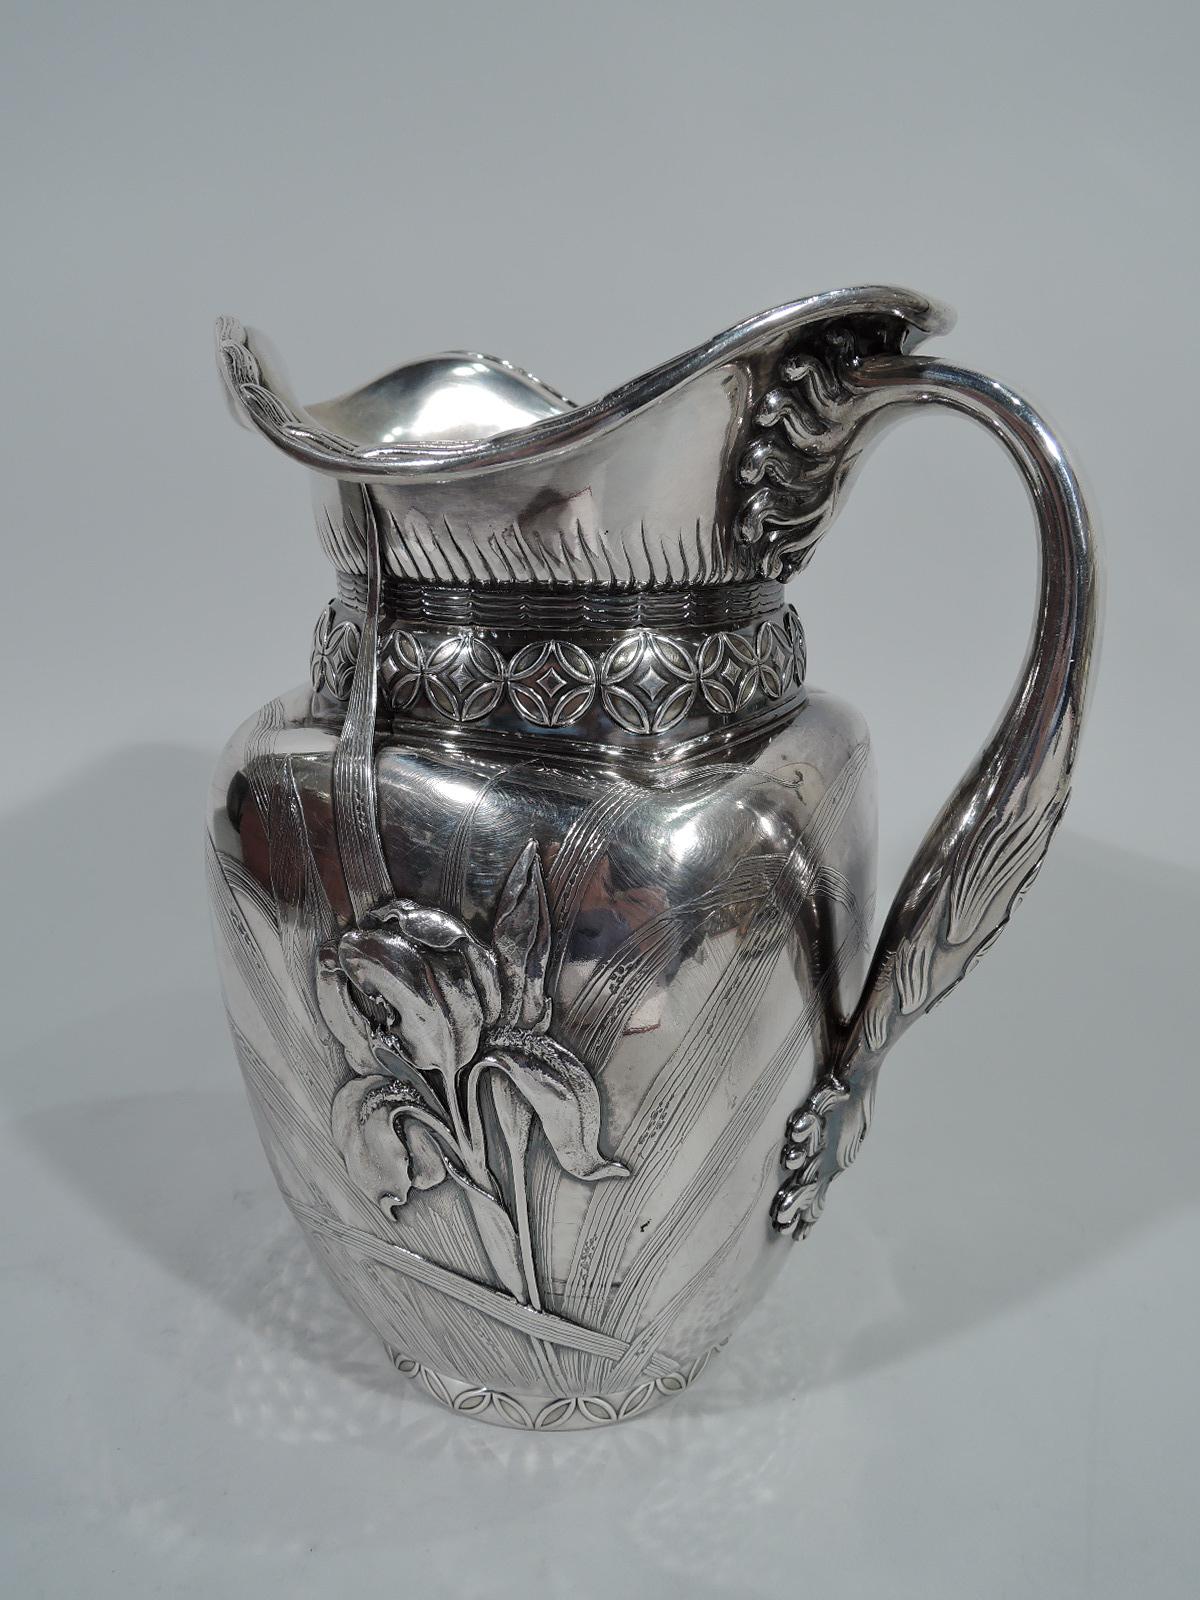 American Stunning Japonesque Sterling Silver Dragonfly Water Pitcher by Whiting